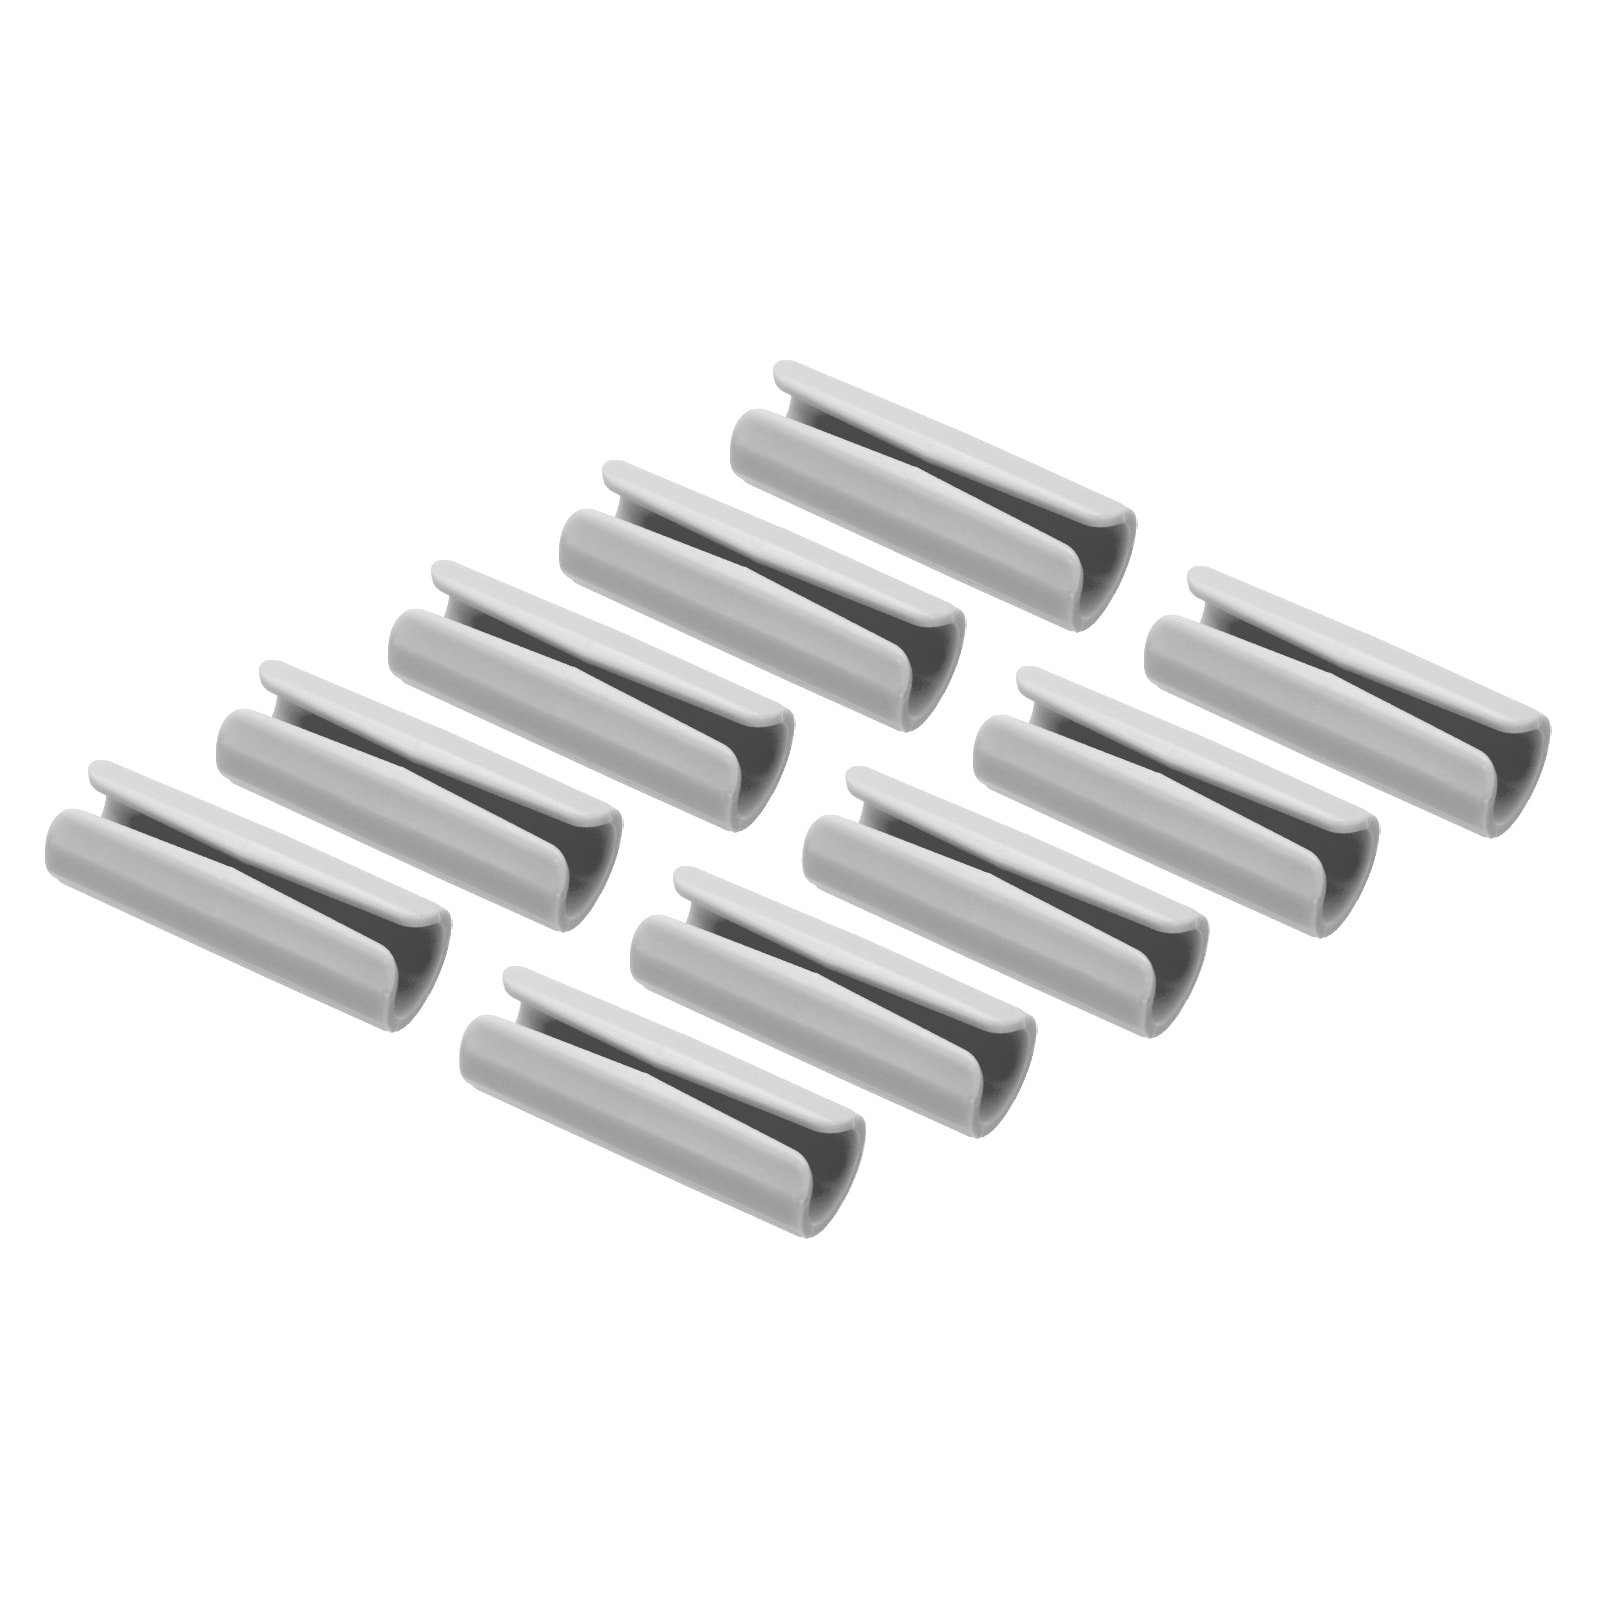 1.9x0.64 inch Bed Sheet Clips, 12Pcs Mattress Covers Fastener Clamp - 1.9 x  0.64inch - On Sale - Bed Bath & Beyond - 36708053